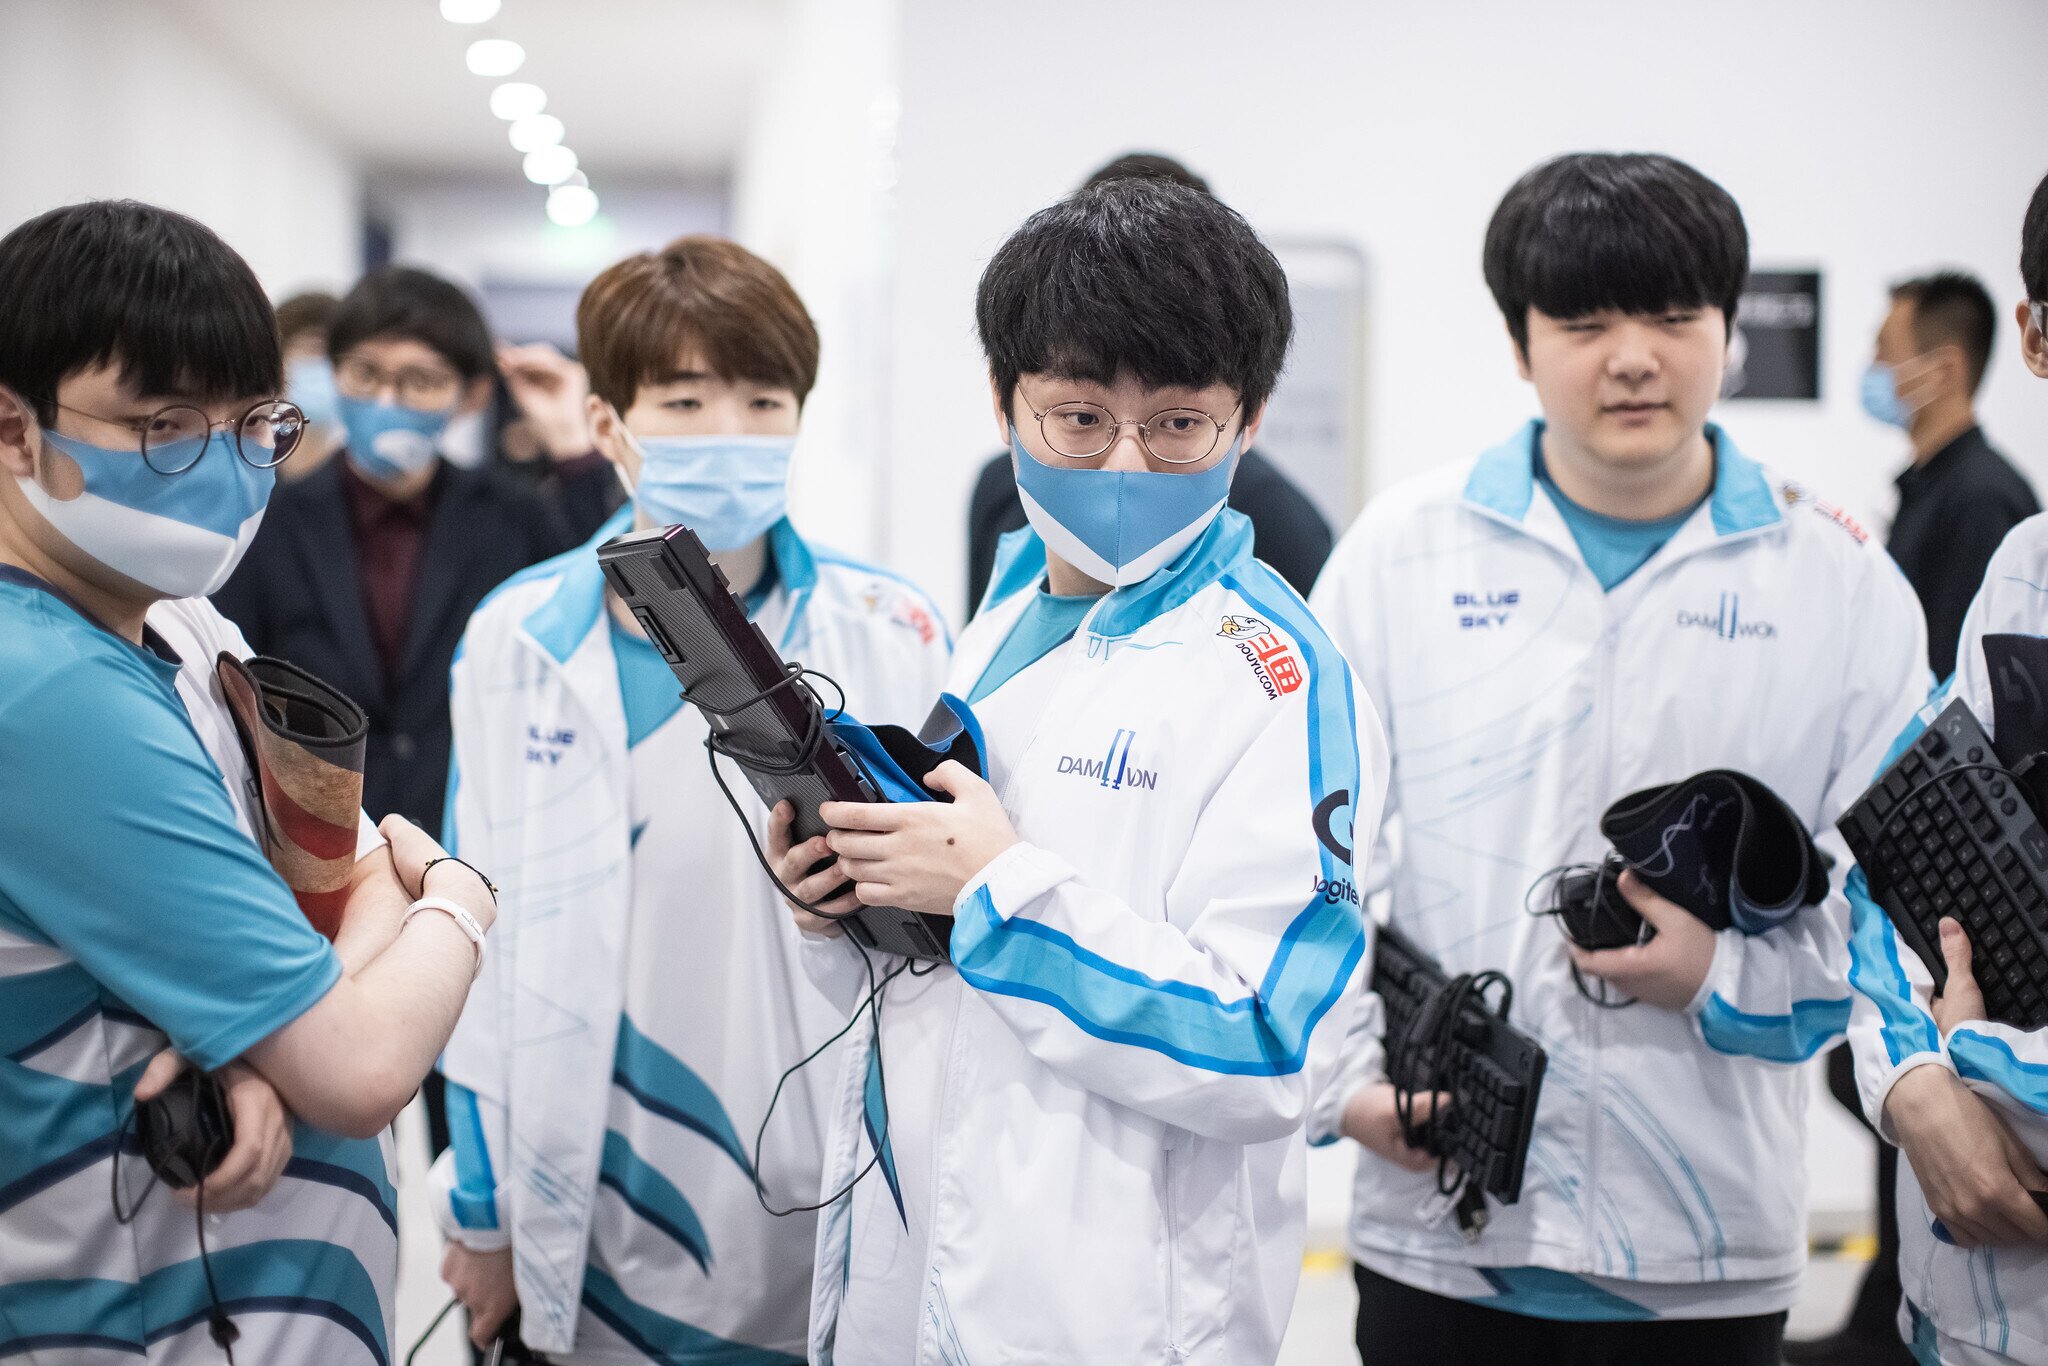 DAMWON Gaming quickly secured first in Group B and are onto the quarterfinals. (Photo via Riot Games)